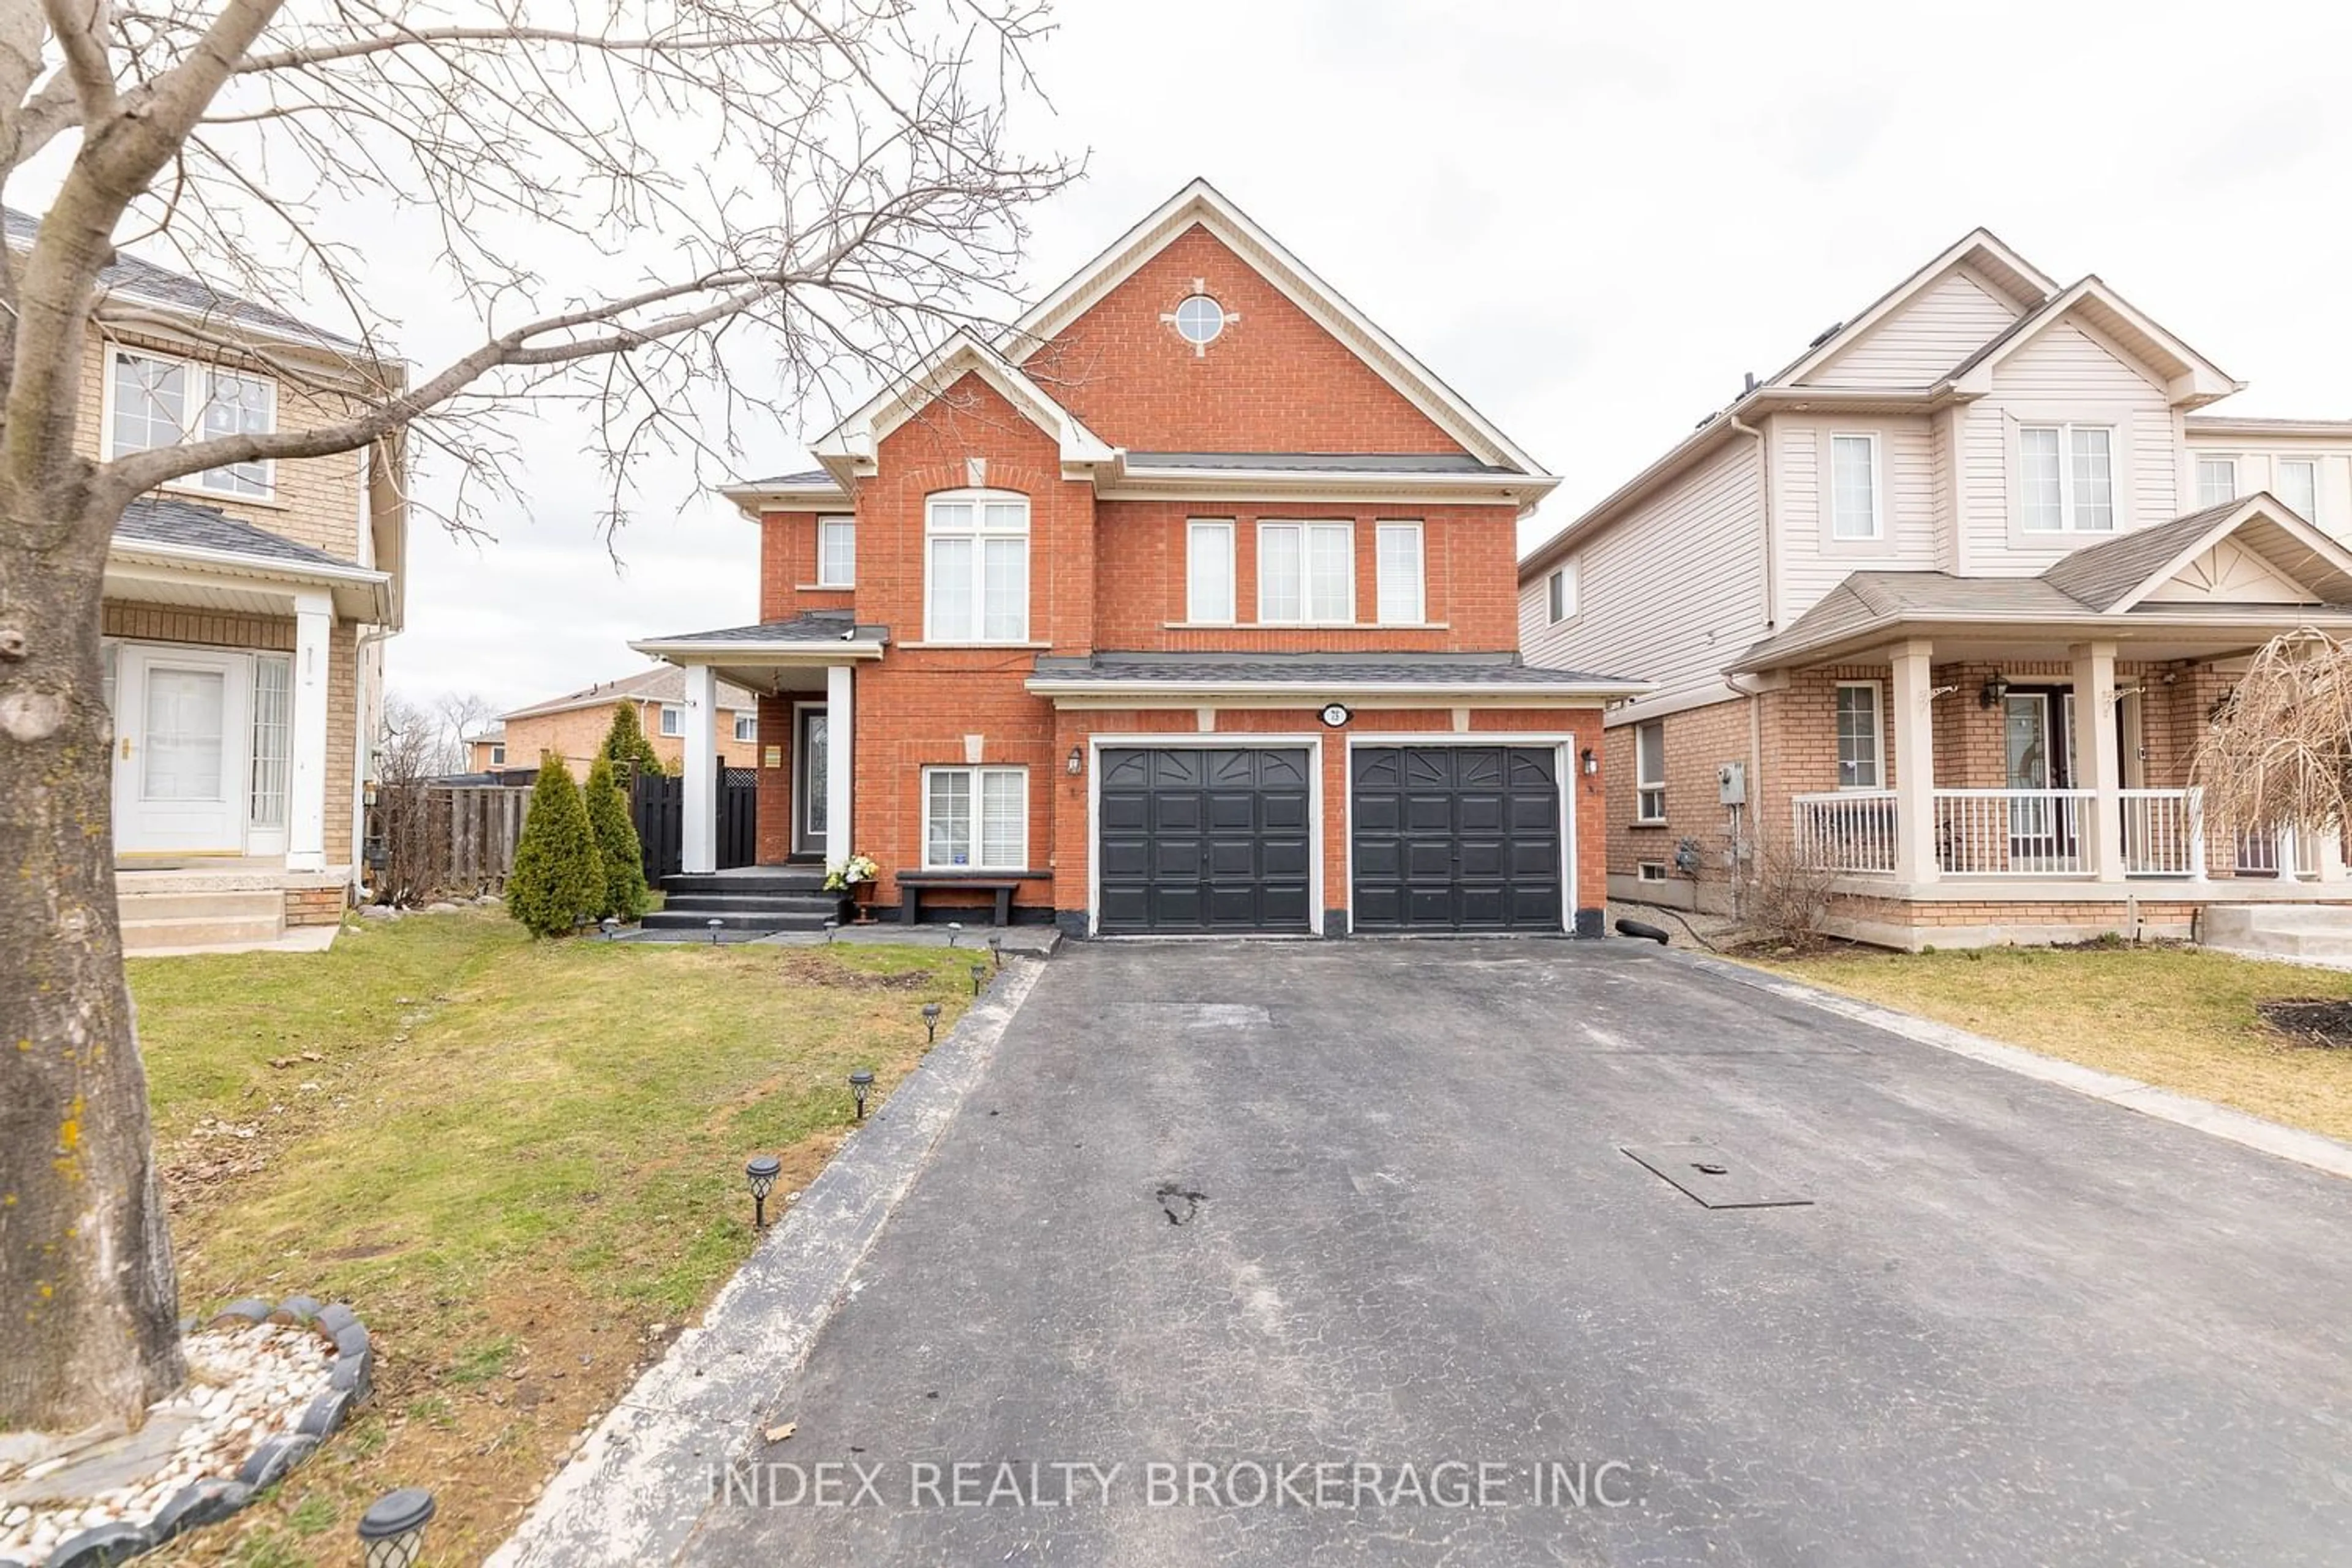 Frontside or backside of a home for 75 Milkweed Cres, Brampton Ontario L7A 2G5